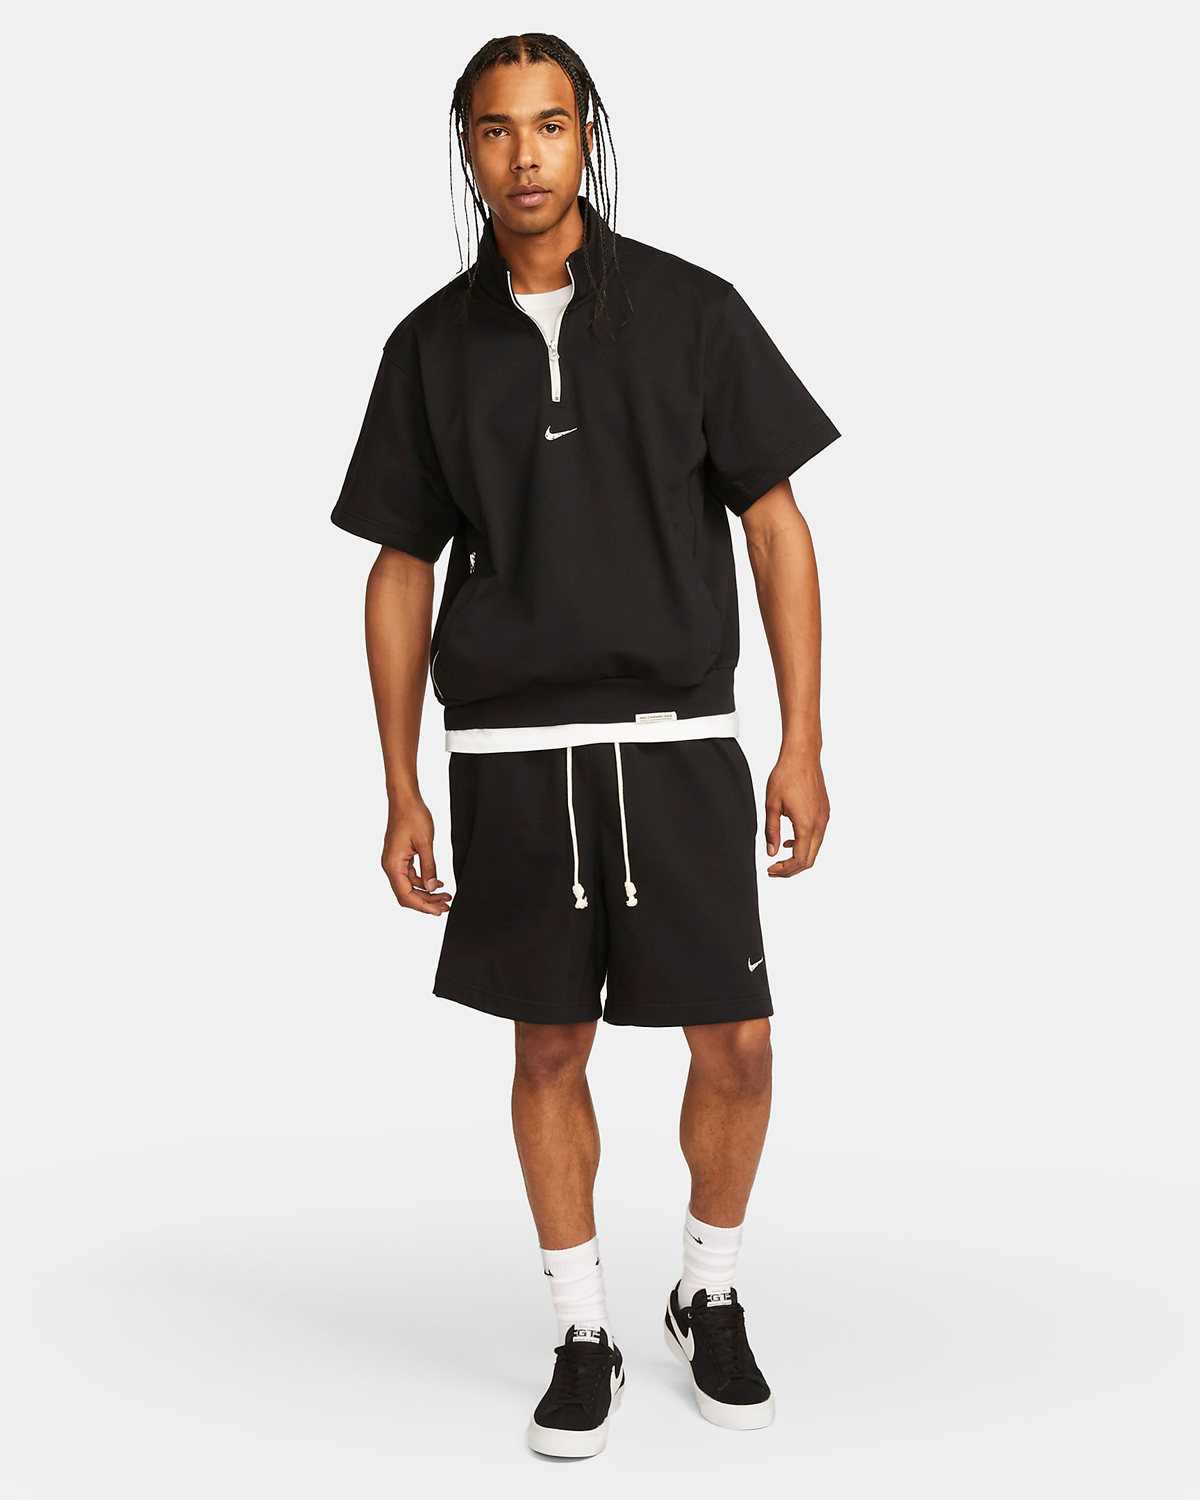 Nike-Standard-Issue-Shorts-Black-White-Outfit